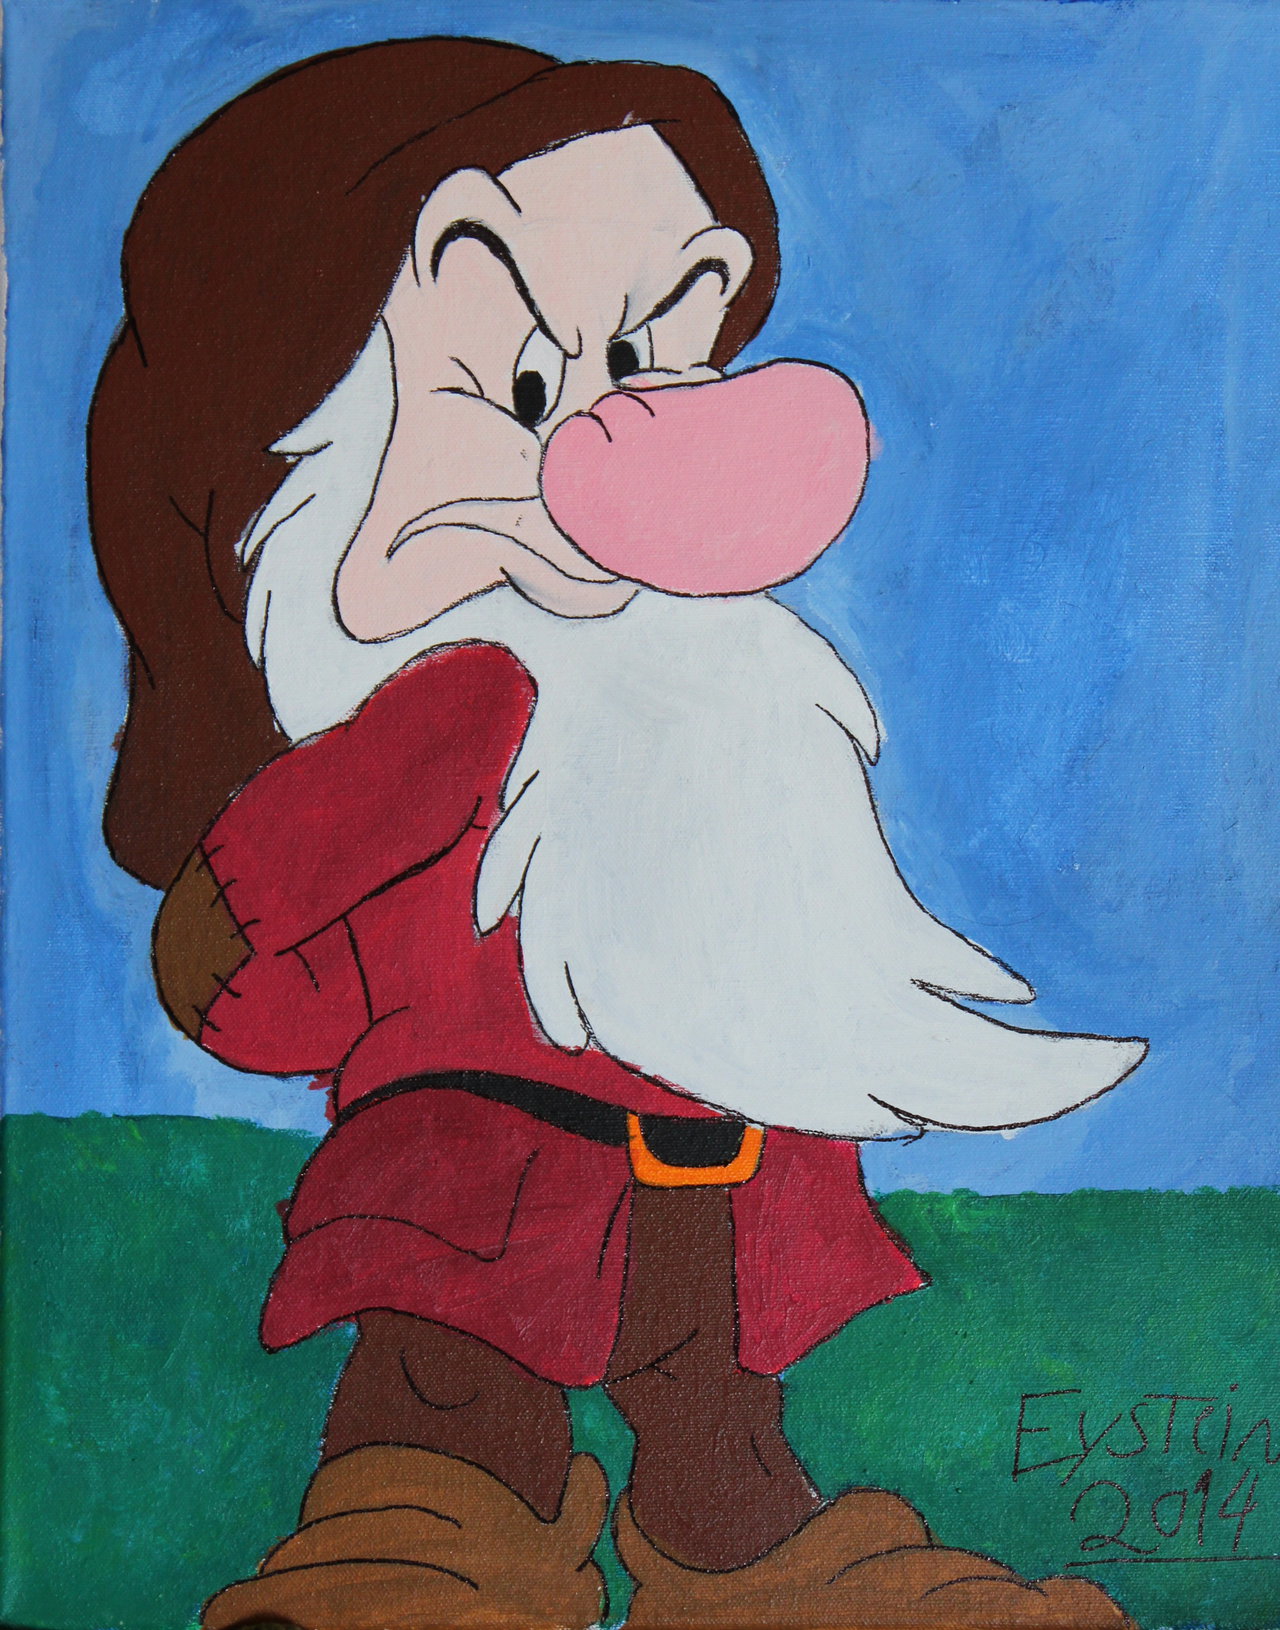 Grumpy from Snow White and the seven Dwarfs by EysteinKN on